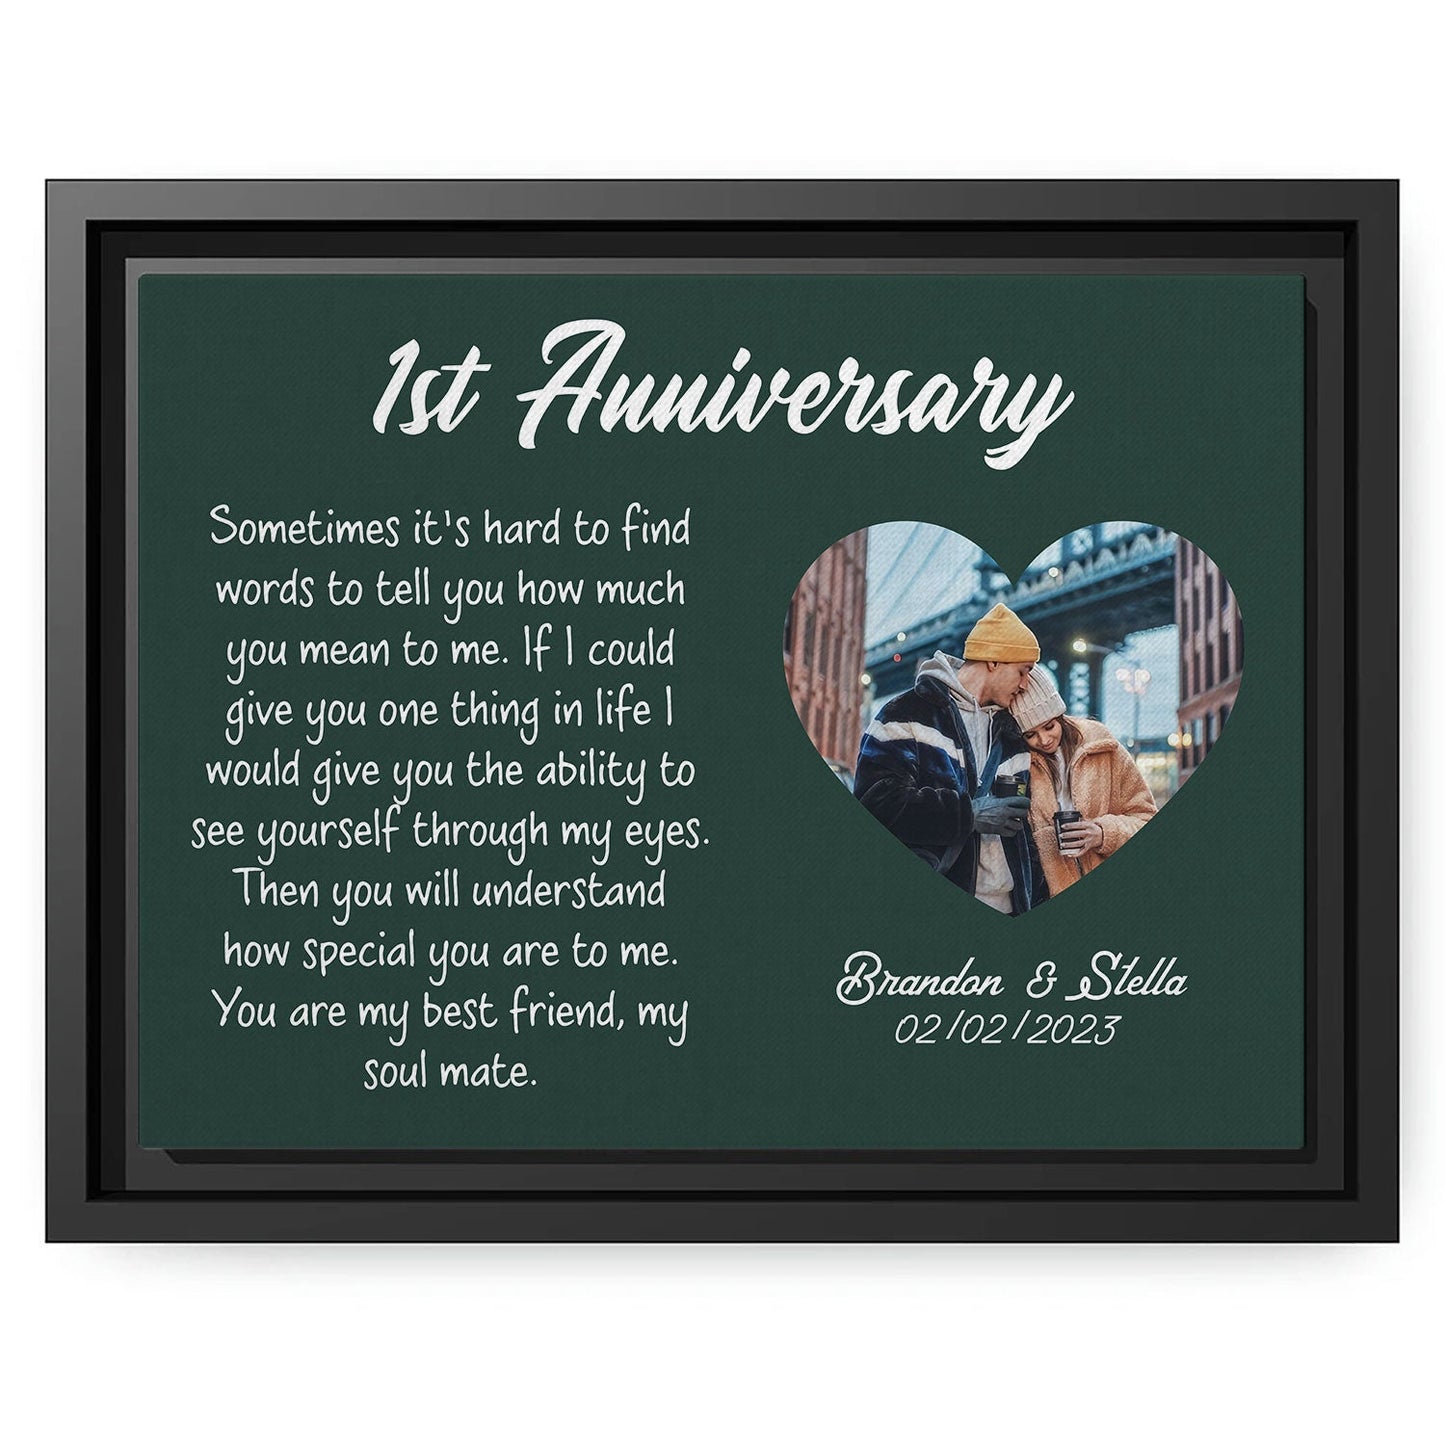 1st Anniversary - Personalized 1 Year Anniversary gift For Husband or Wife - Custom Canvas Print - MyMindfulGifts